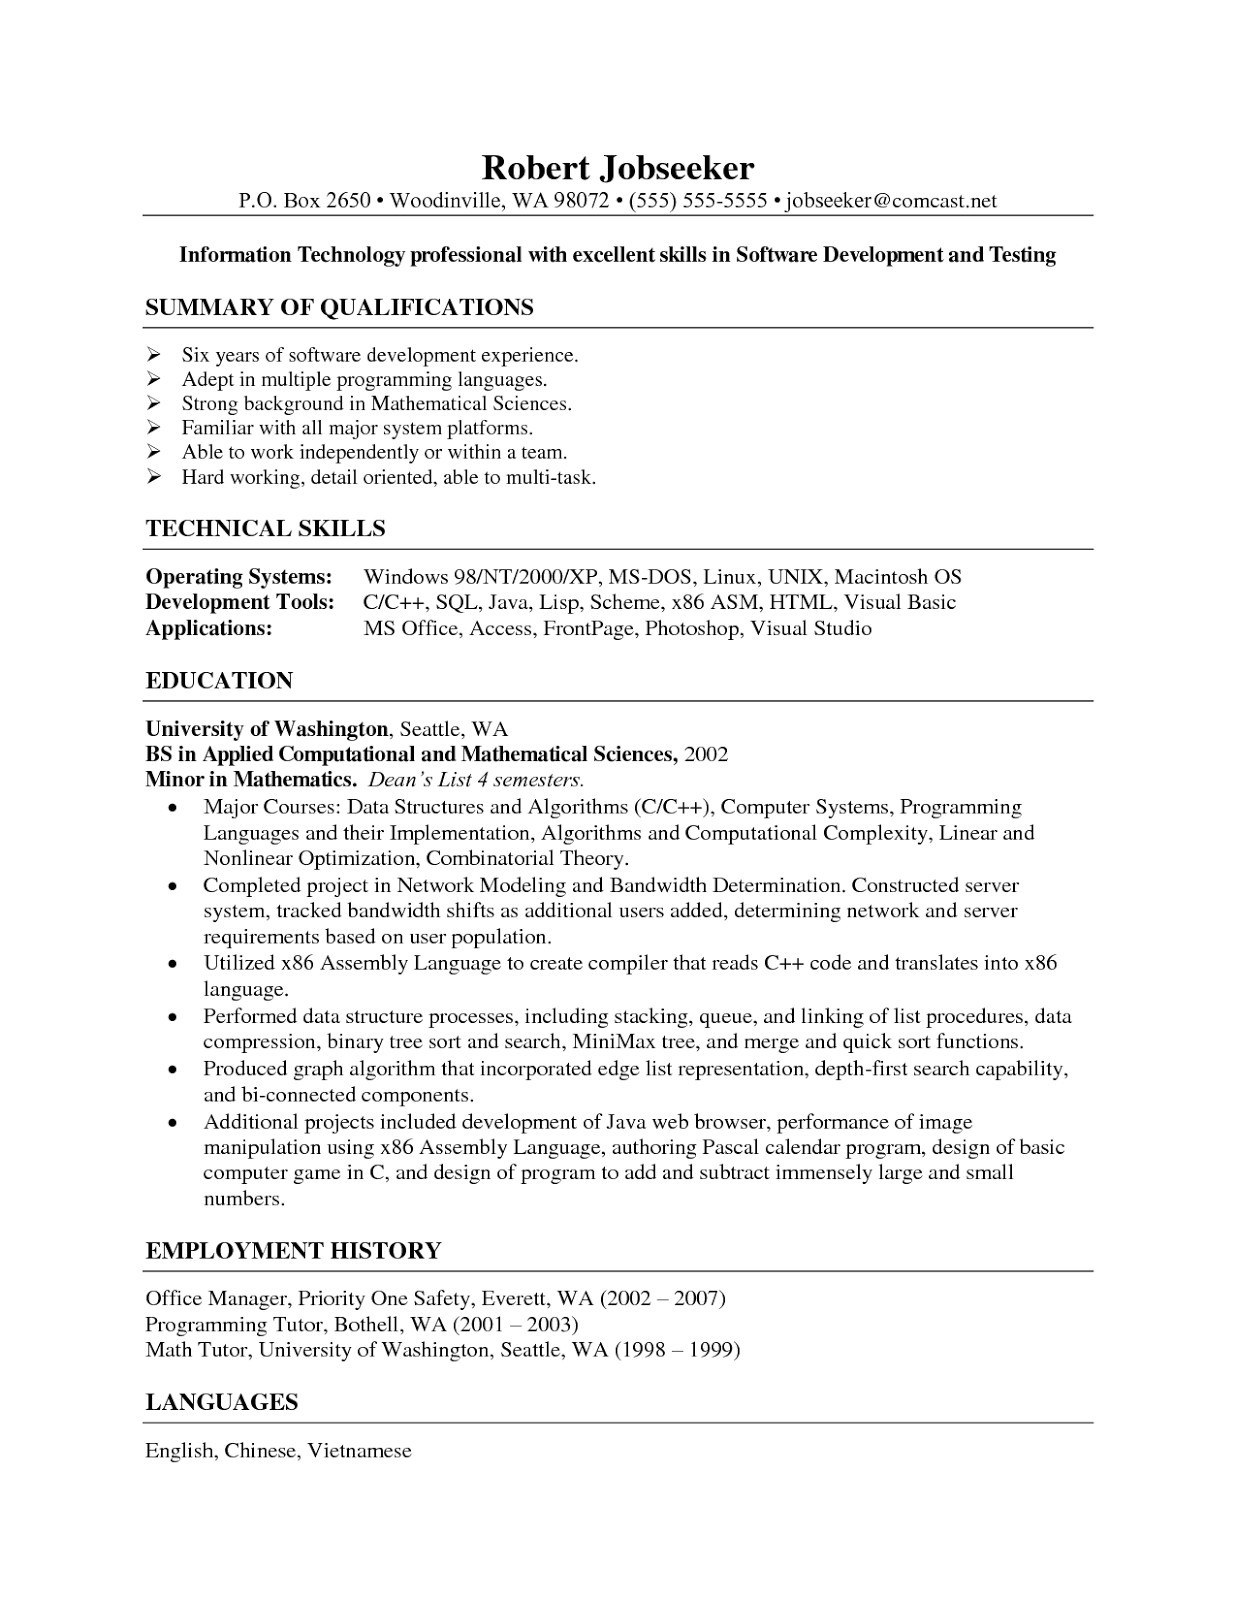 Medical Coding Resume Sample No Experience Medical Billing and Coding Cover Letter with No Experience